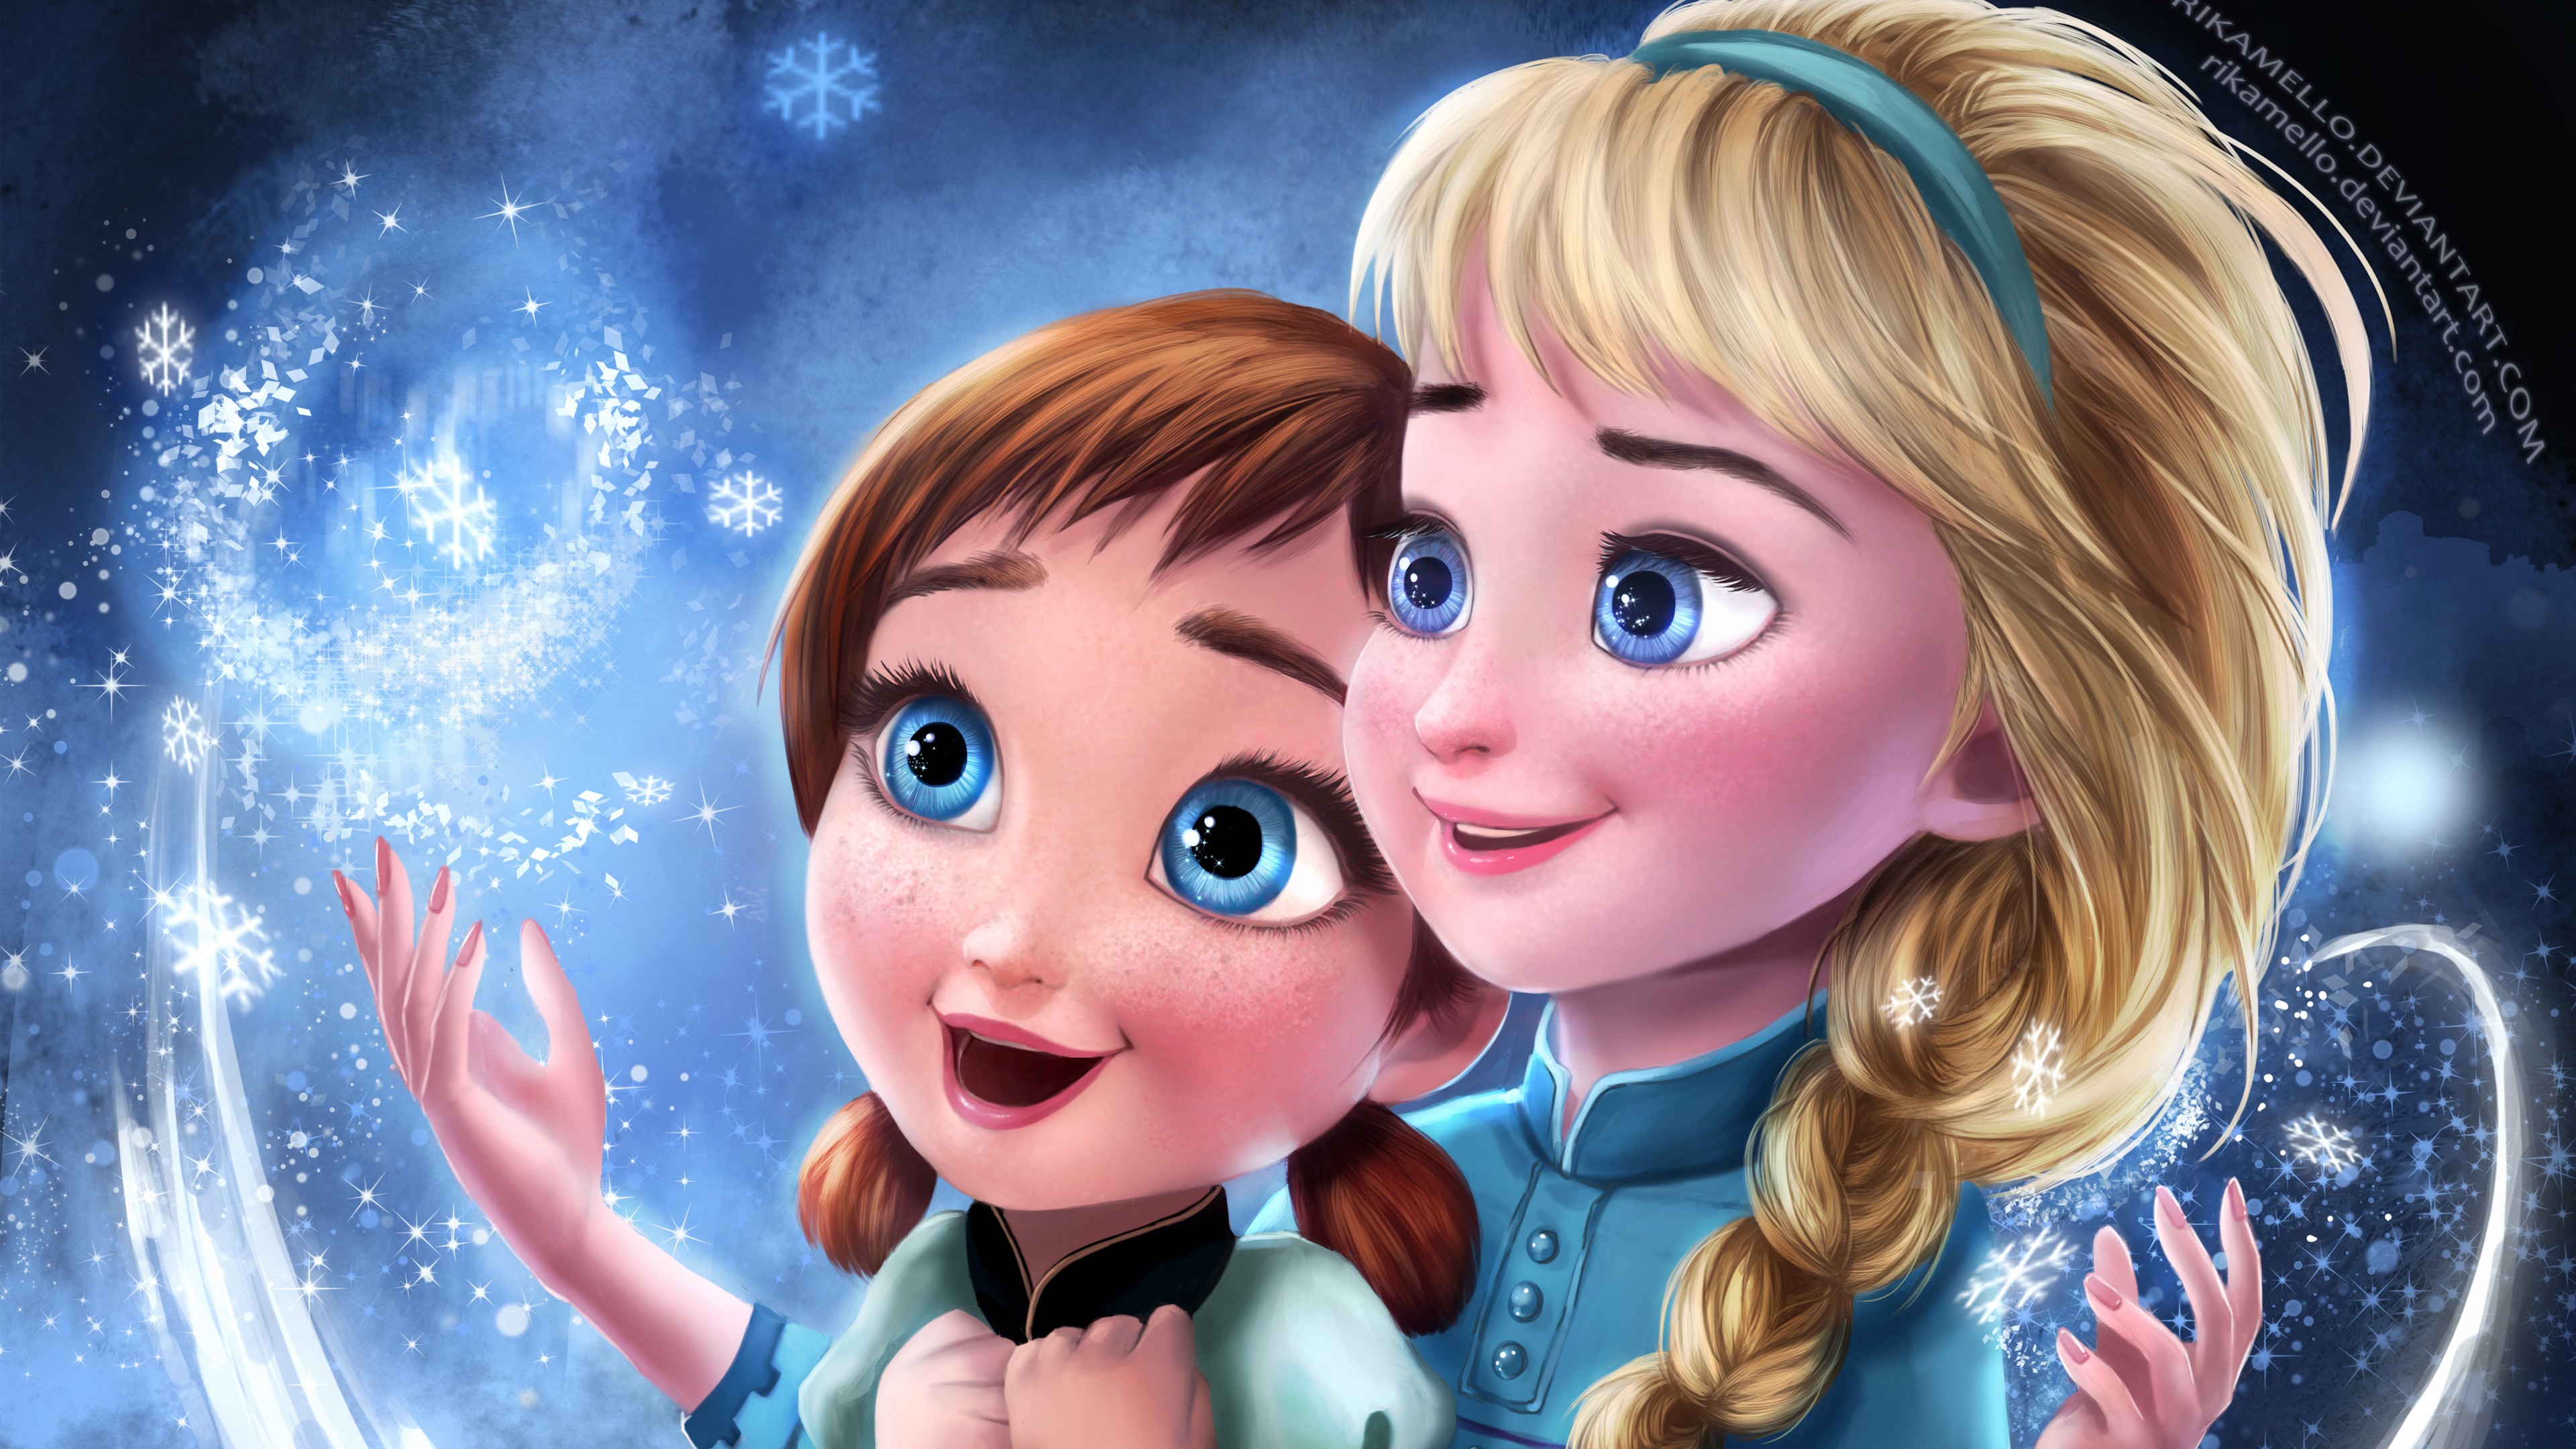 Frozen Elsa Anna Sisters Wallpapers | HD Wallpapers | ID #17304